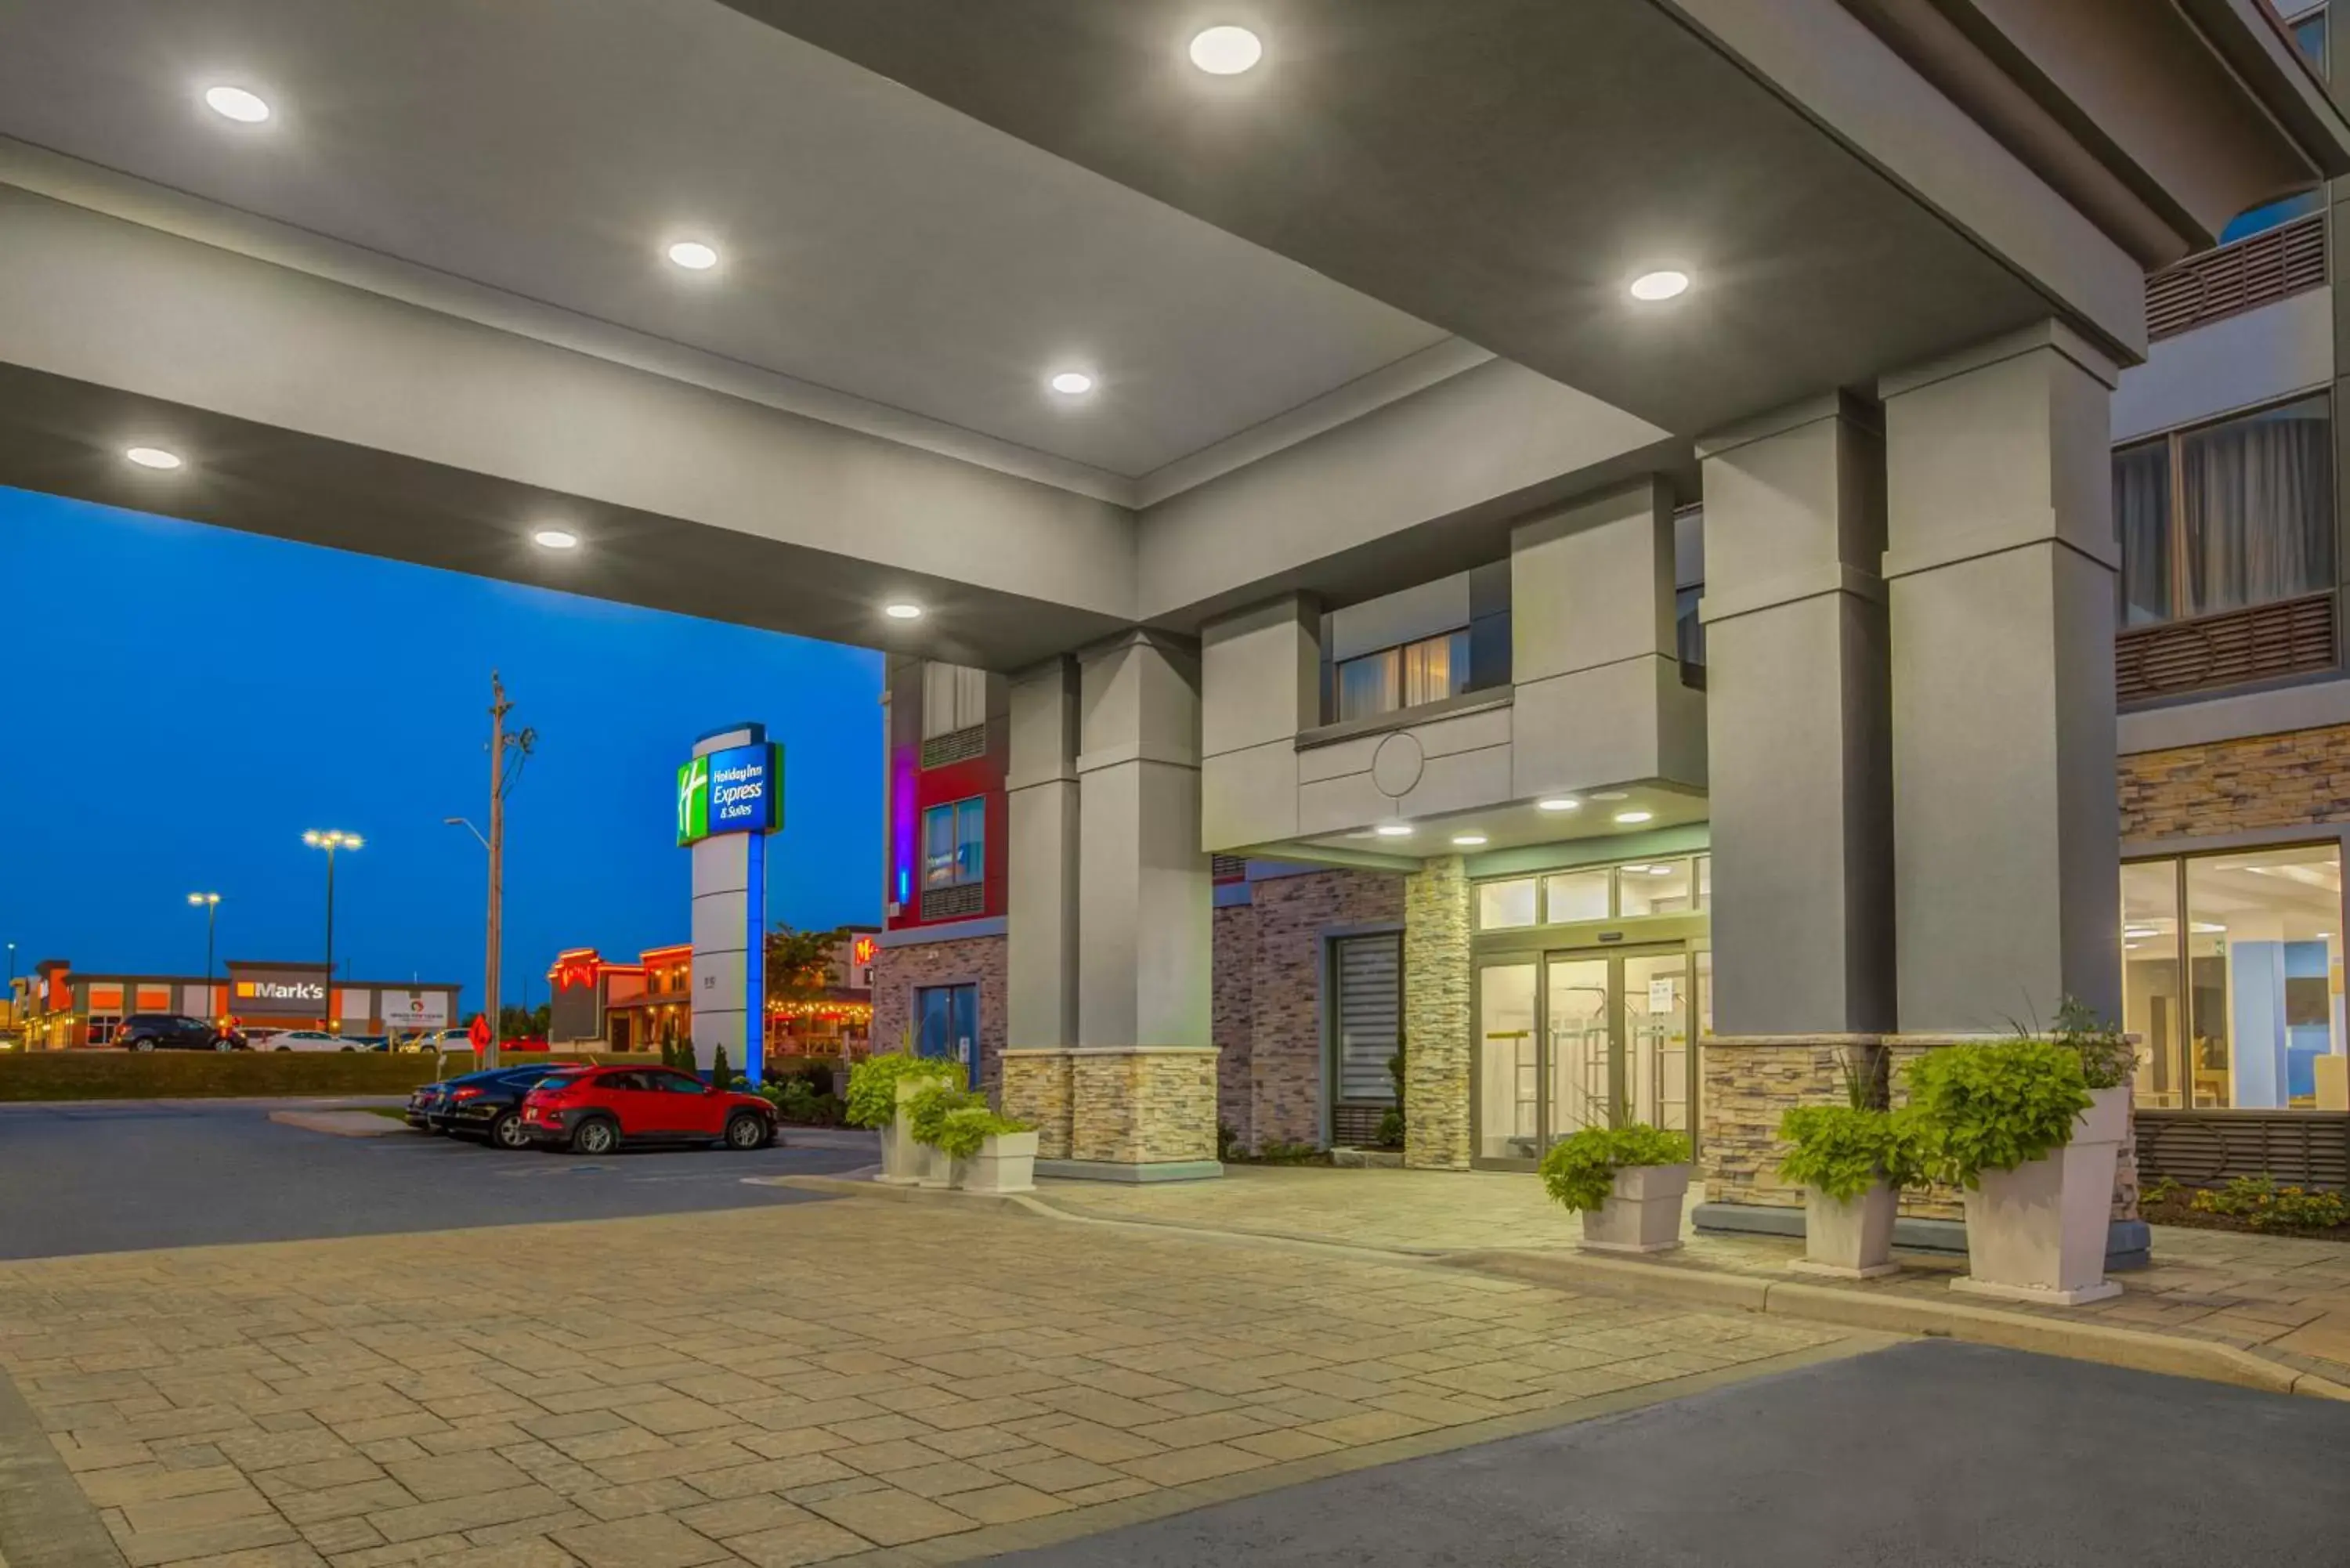 Property building in Holiday Inn Express Hotel & Suites - Woodstock, an IHG Hotel